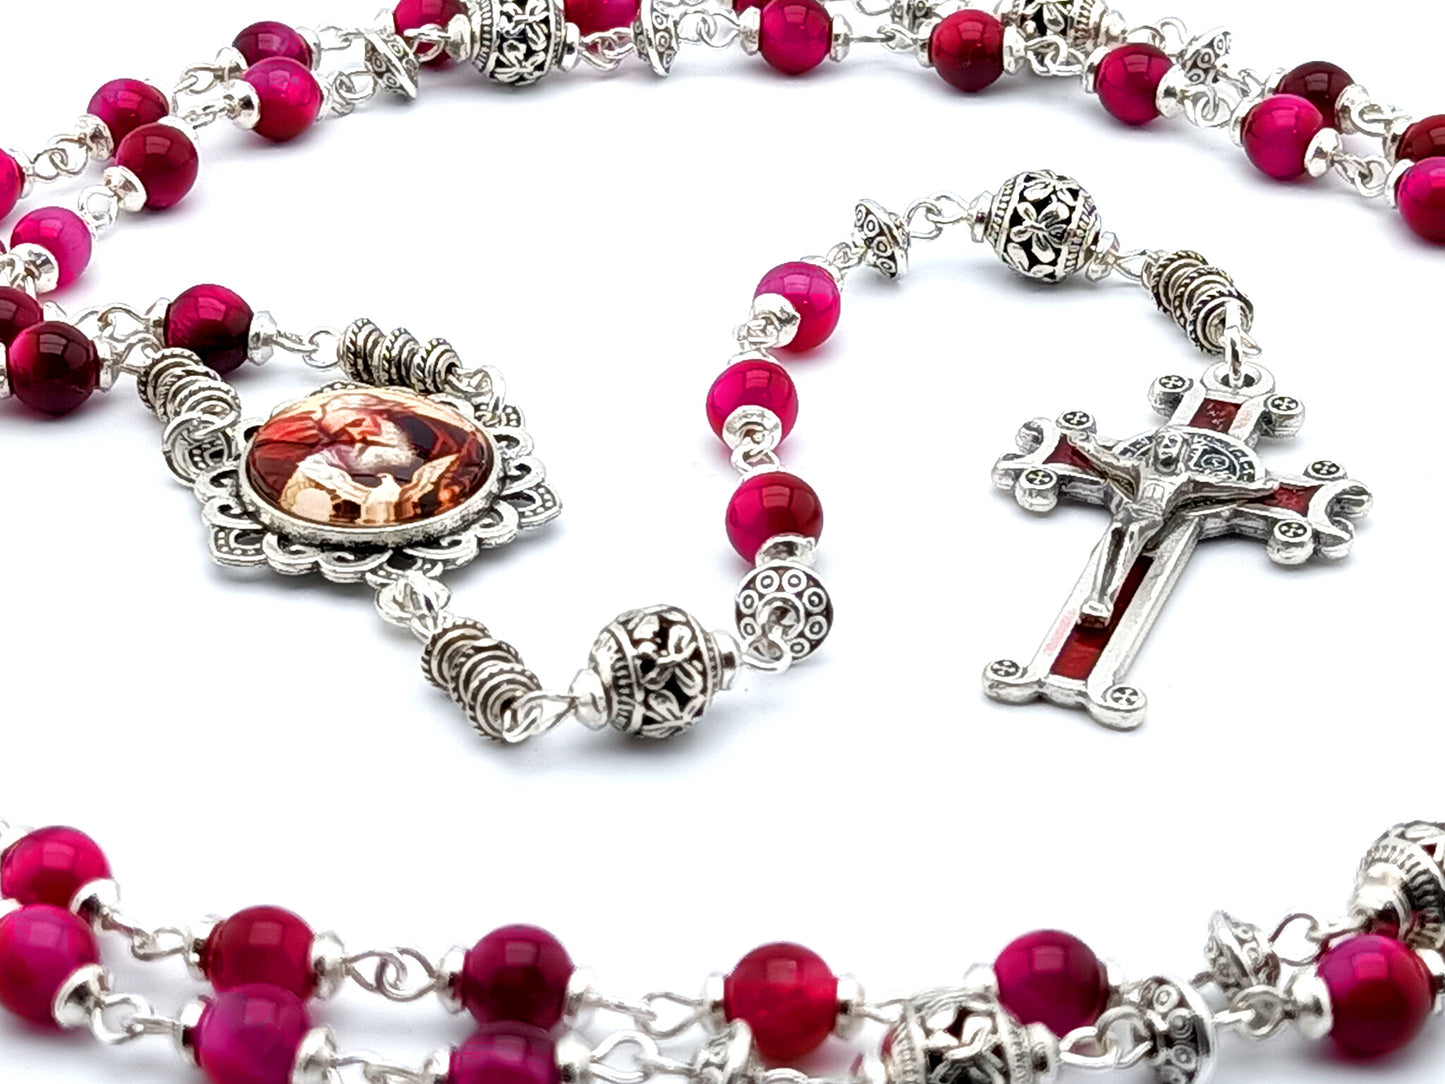 Holy Trinity unique rosary beads with pink tigers eye gemstone beads, silver pater beads, silver and red enamel Saint Benedict crucifix and picture centre medal.